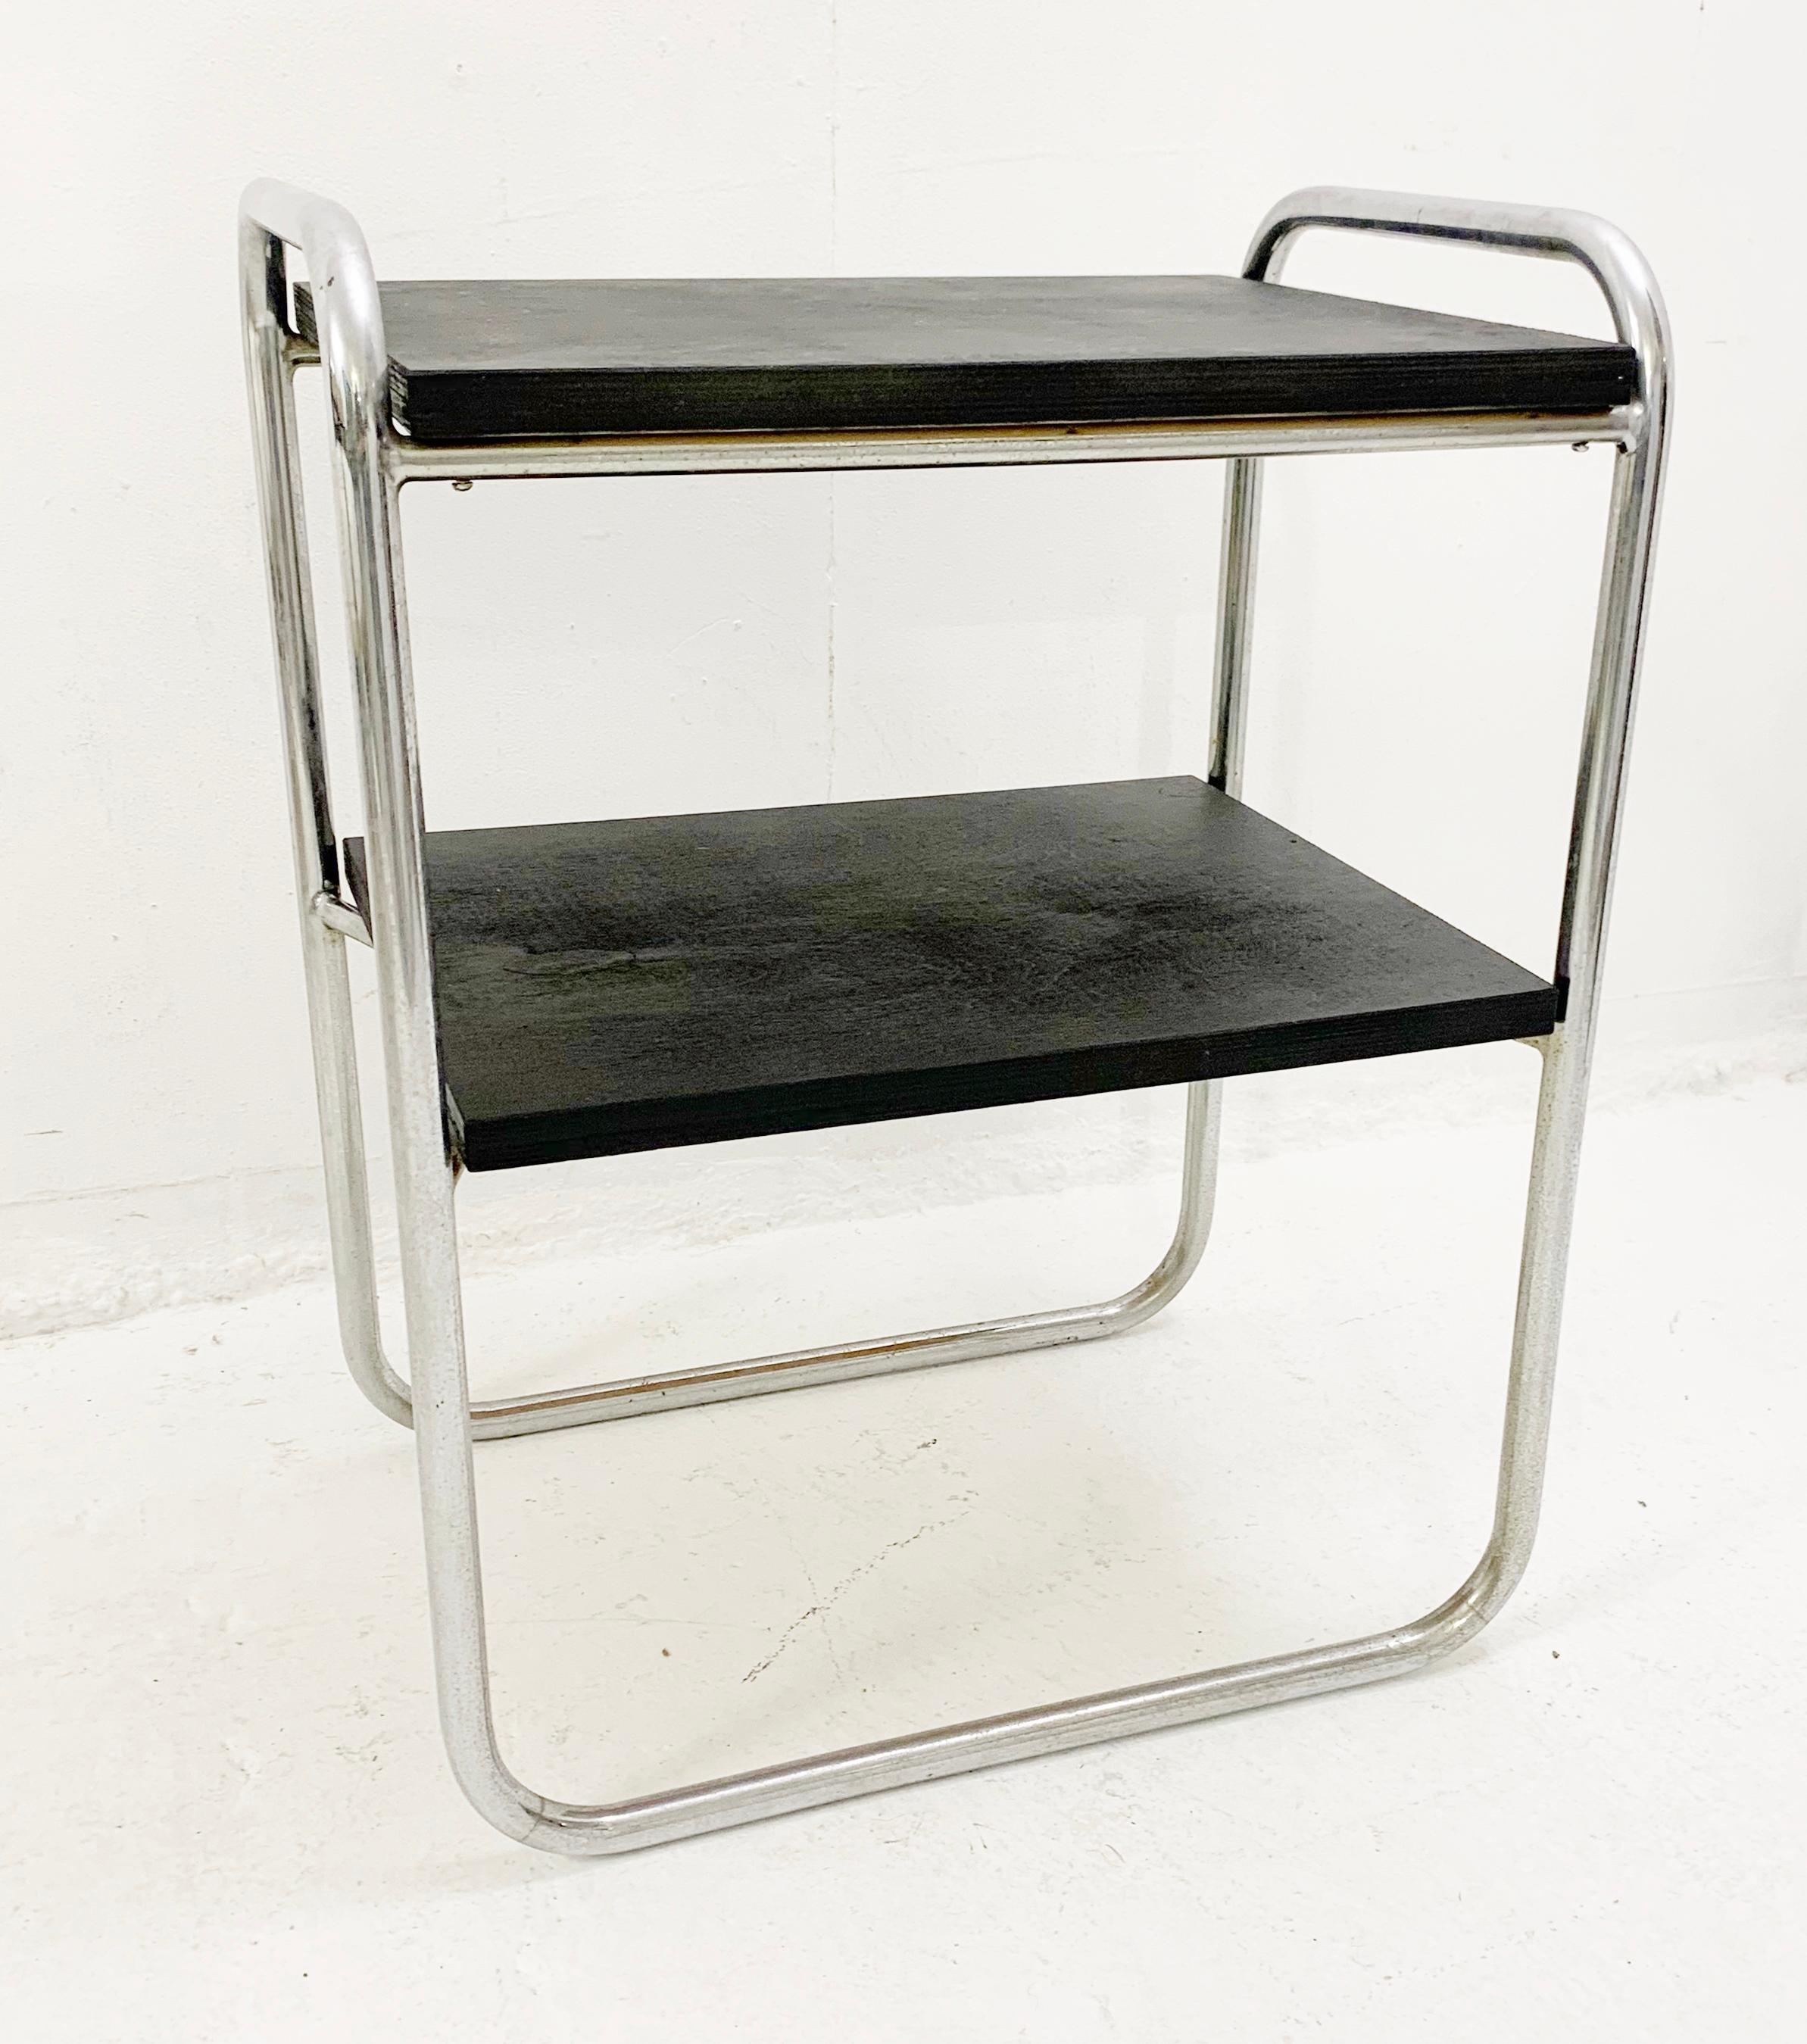 Belgian Modernist Small Wood and Tubular Steel Side Table, 1930s For Sale